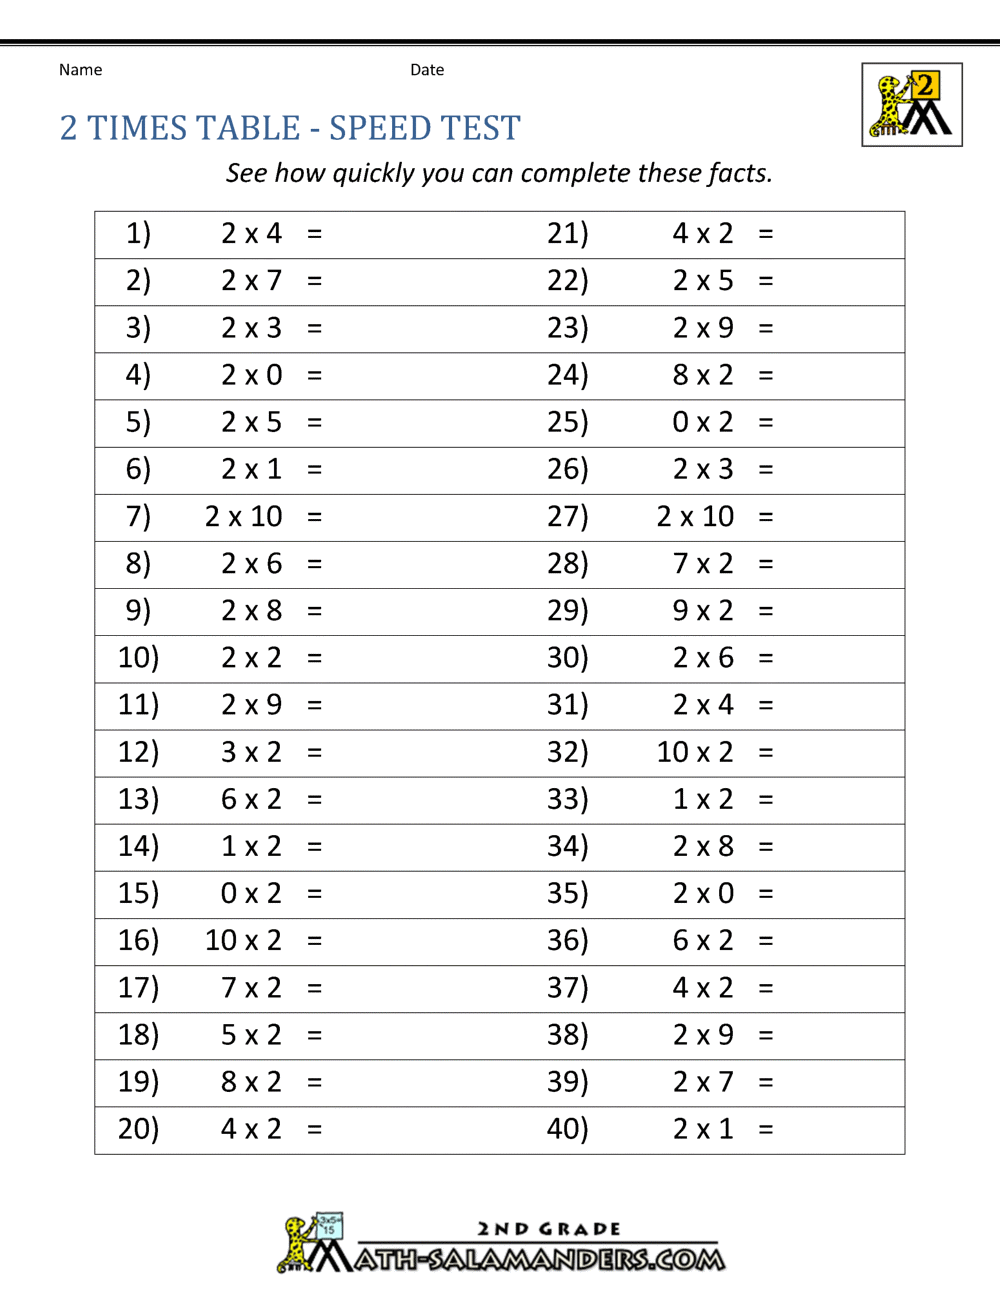 2-times-tables-speed-test-gif-1000-1294-times-tables-worksheets-printable-multiplication